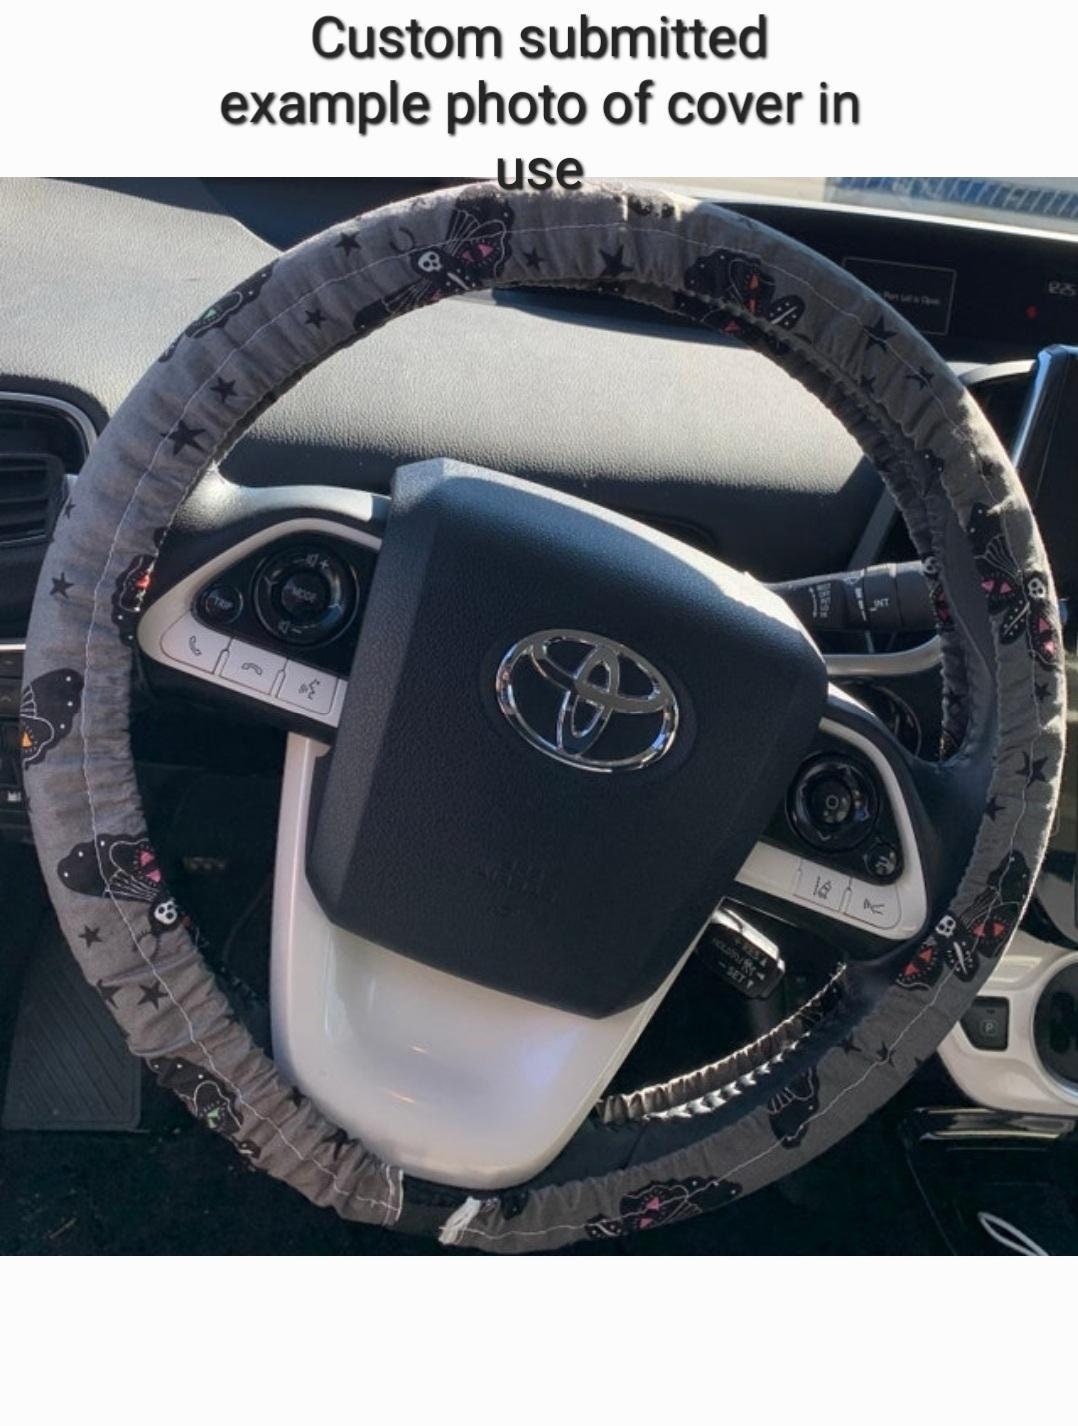 Skull & Bows Steering Wheel Cover - Harlow's Store and Garden Gifts